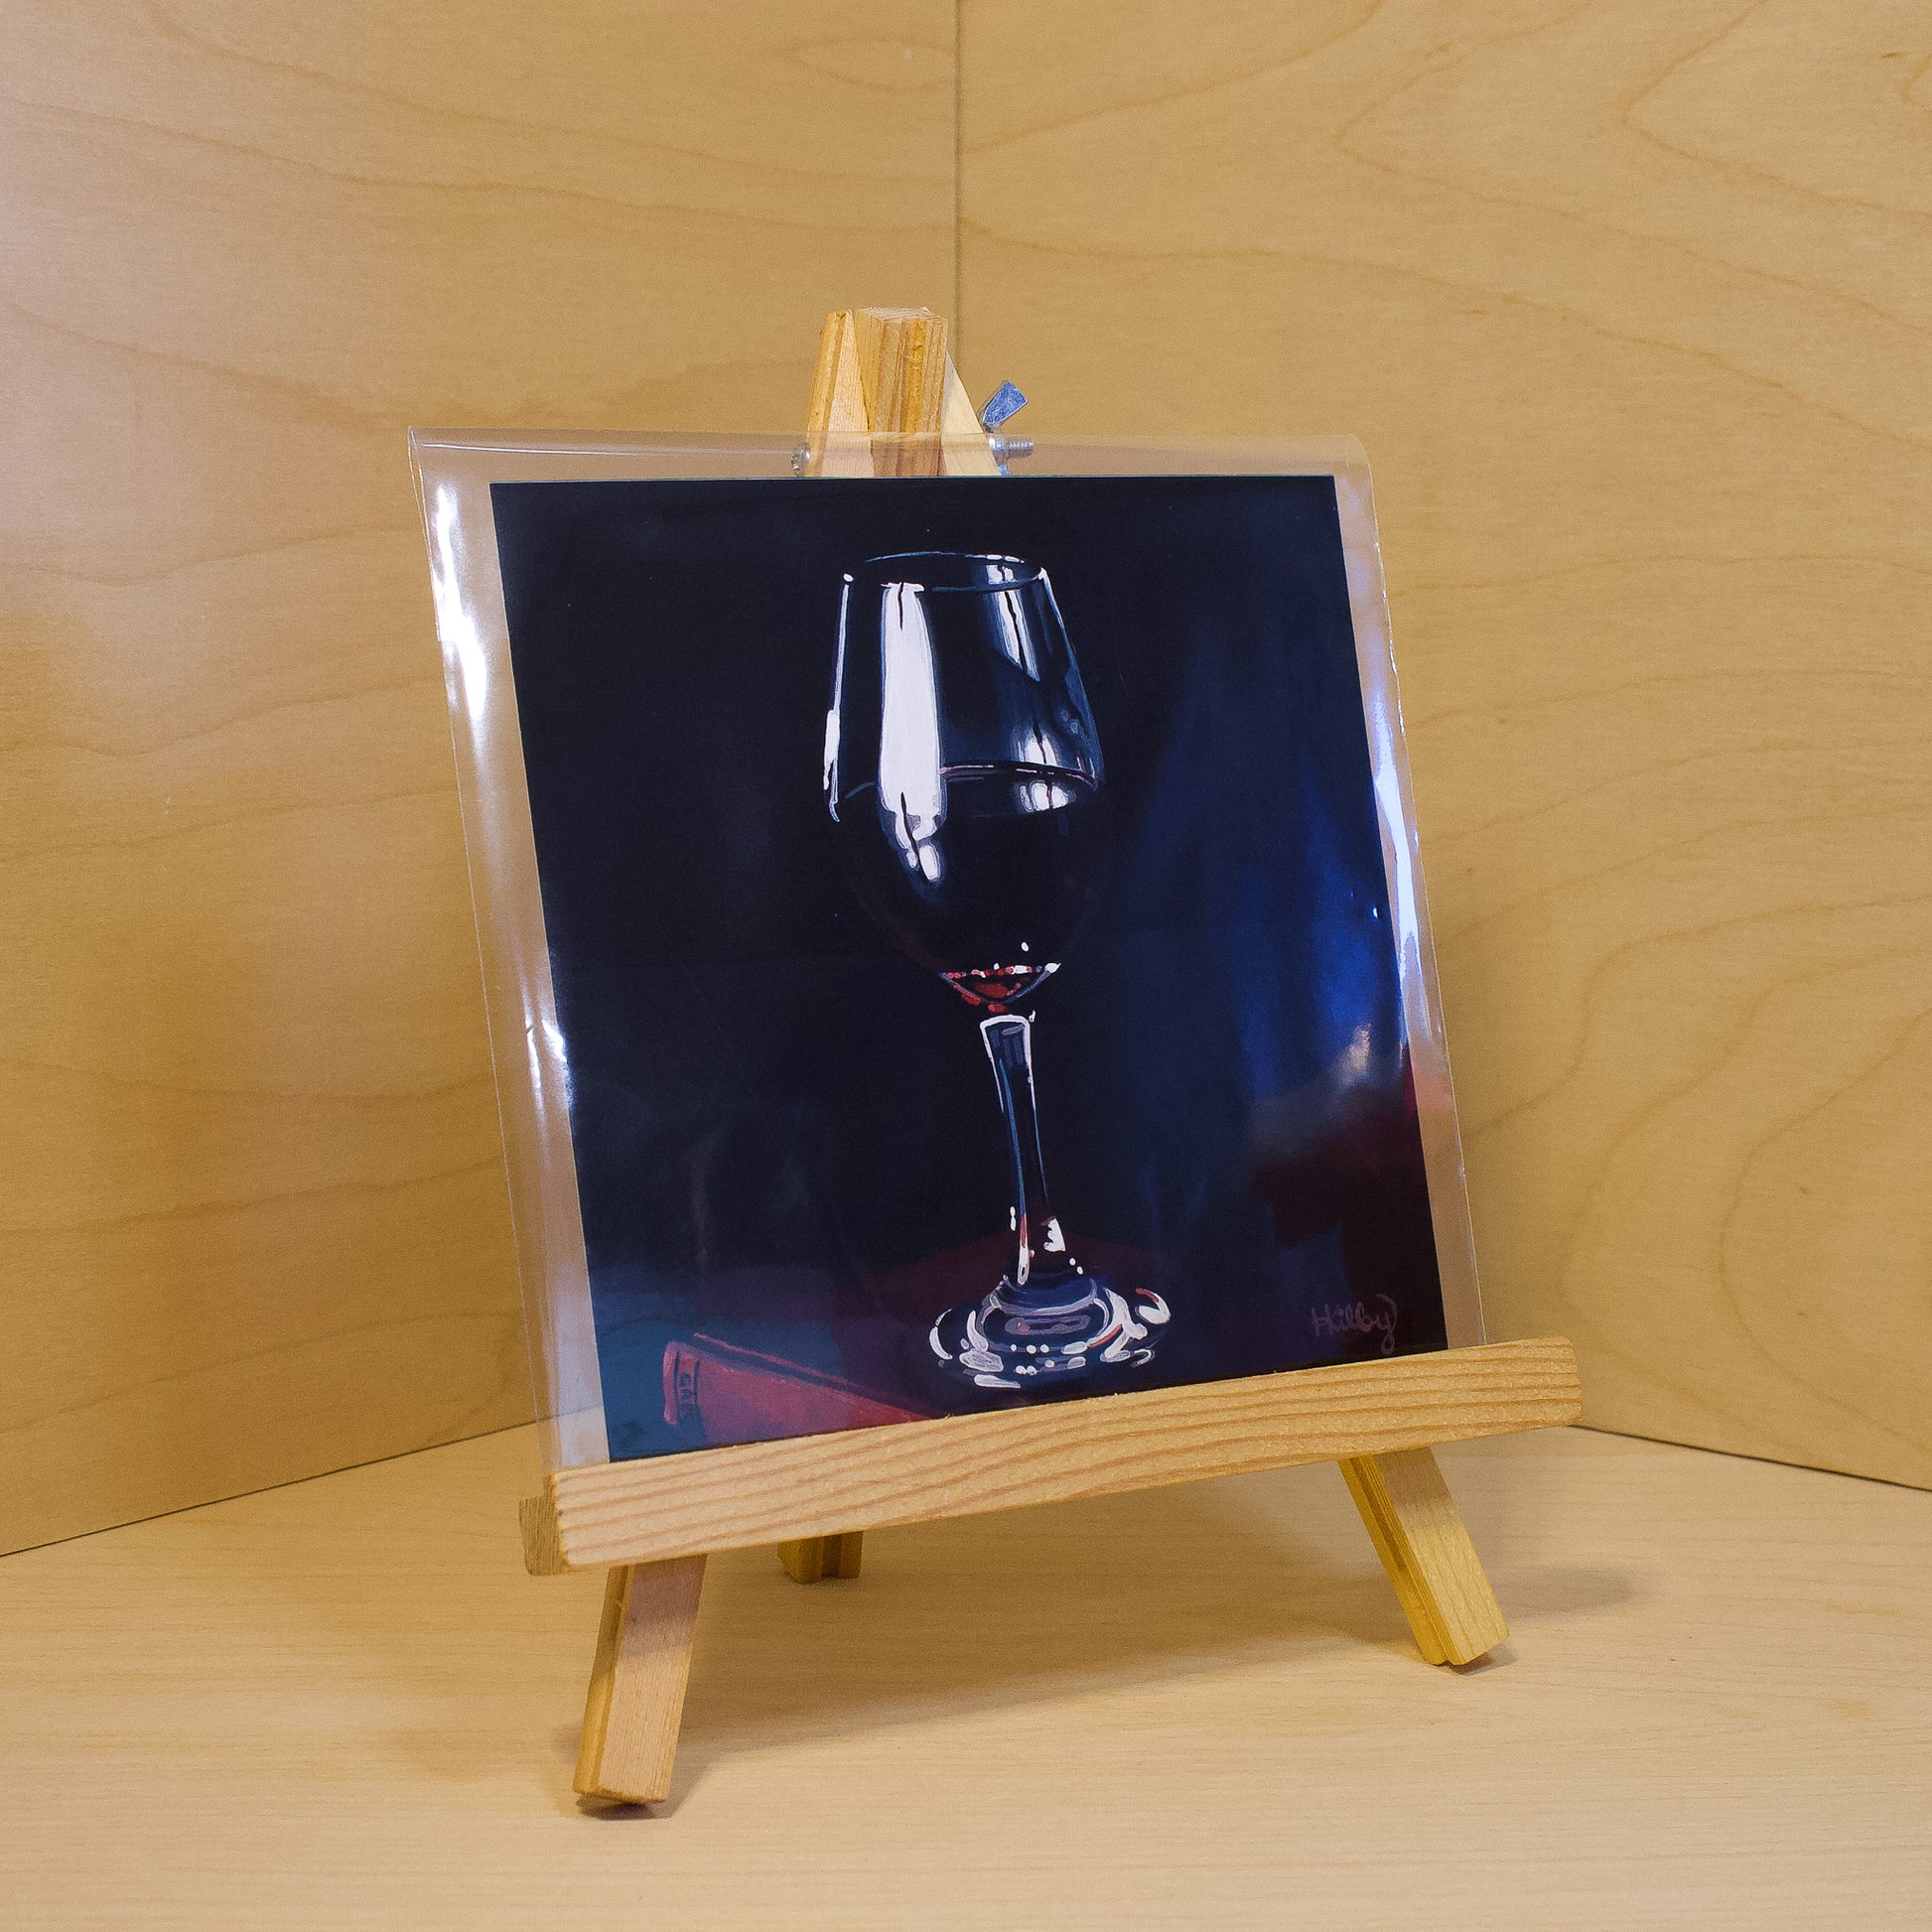 A 6x6" fine art print of the original acrylic painting "Red Wine" by Hannah Kilby from Hannah Michelle Studios. Displayed in a protective plastic sleeve on a small, wooden easel.